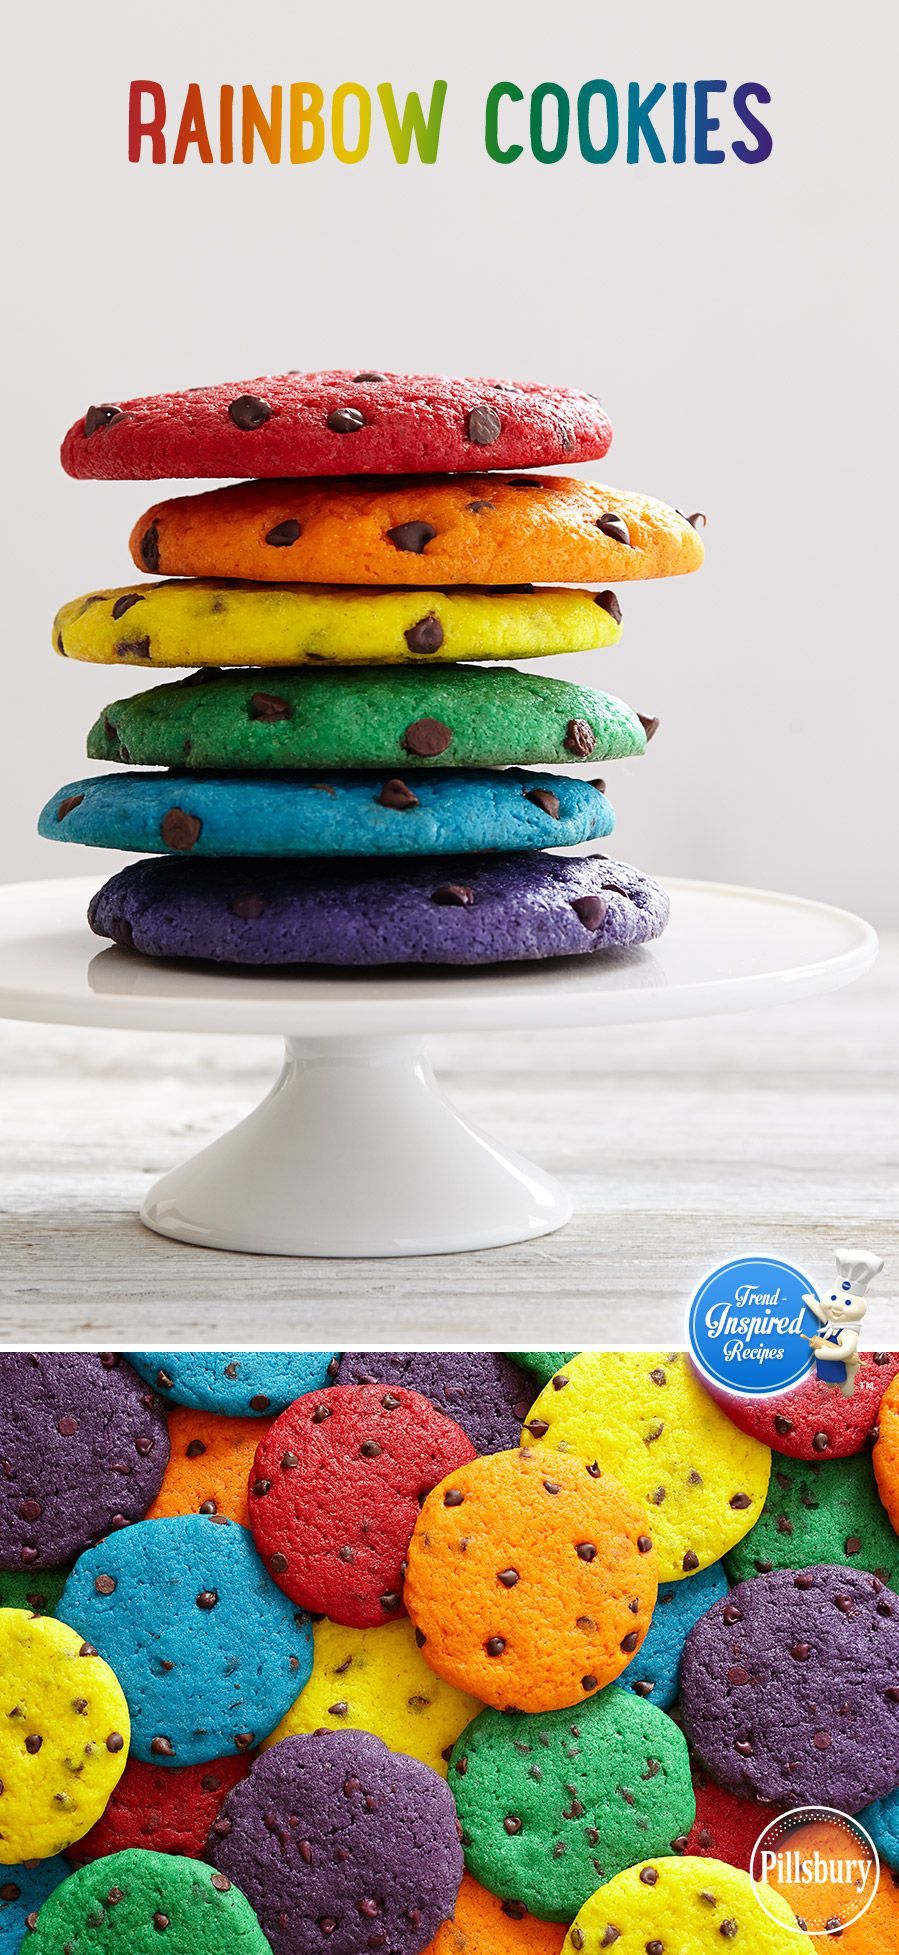 Bright, bold colors aren’t just for your summer wardrobe. Try this trend with your next batch of chocolate chip cookies! Serve